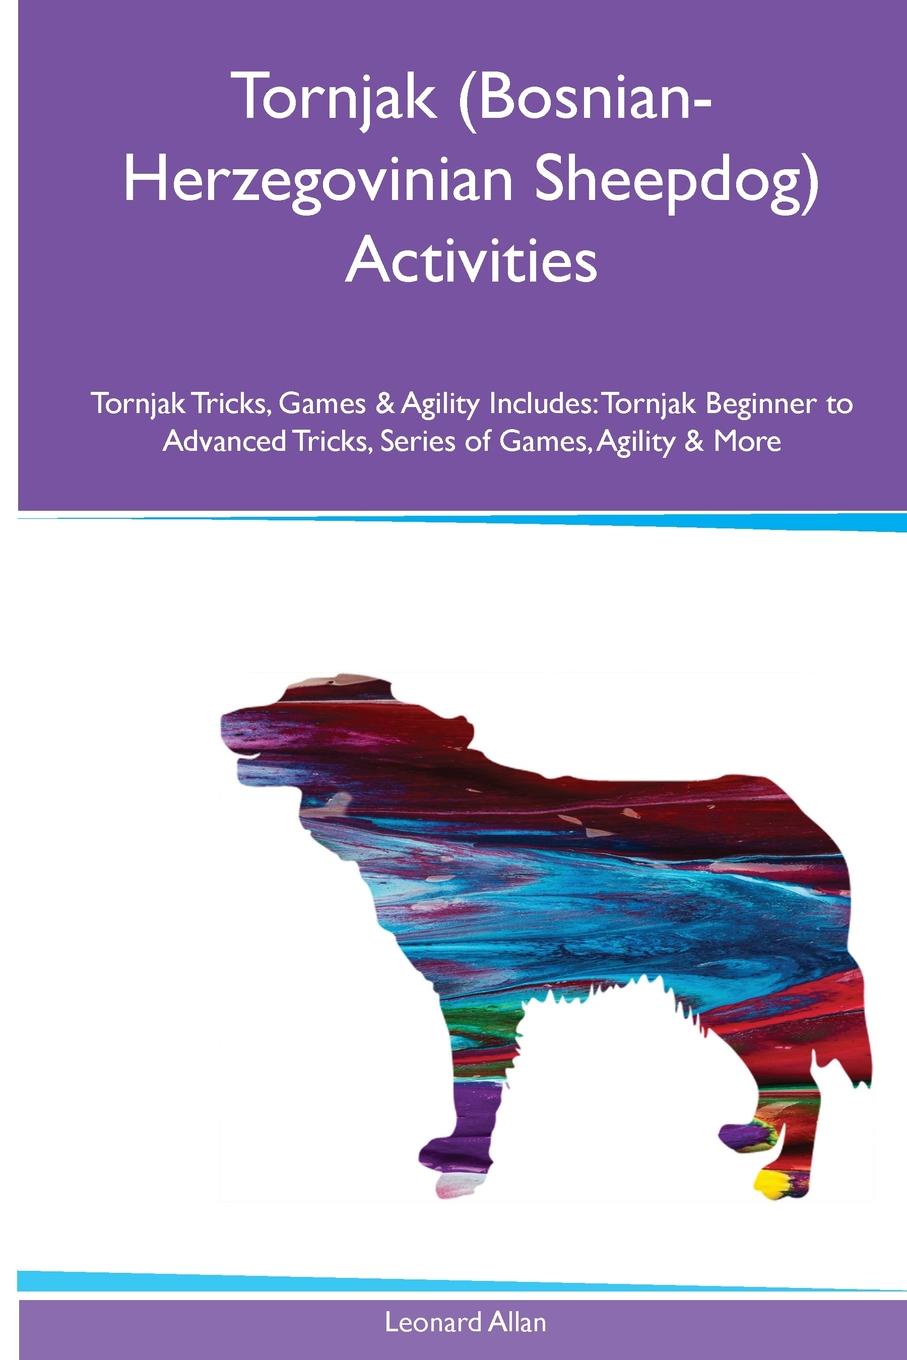 Tornjak (Bosnian-Herzegovinian Sheepdog) Activities Tornjak Tricks, Games & Agility. Includes. Tornjak Beginner to Advanced Tricks, Series of Games, Agility and More